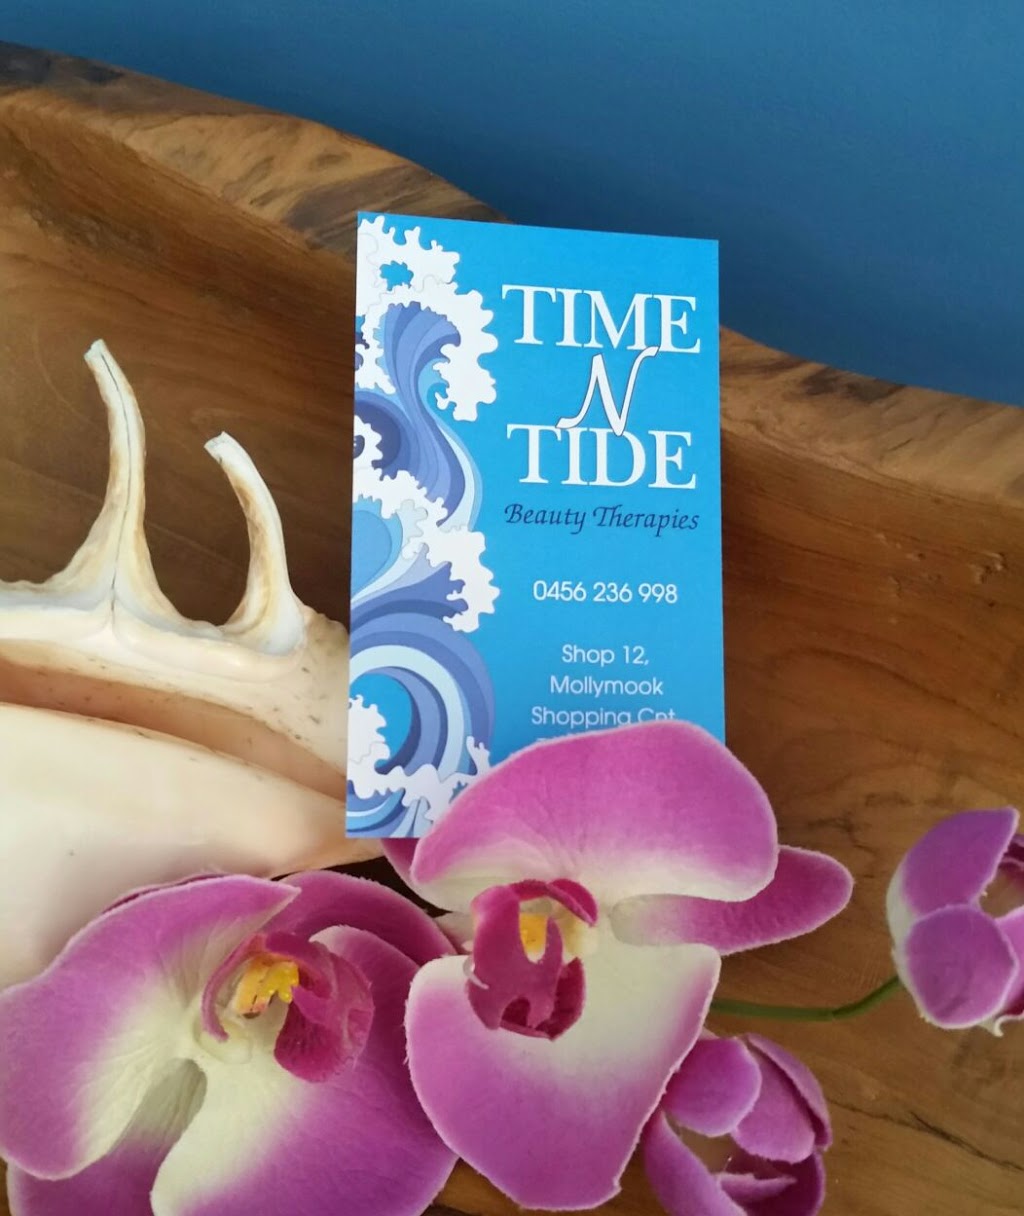 TIMENTIDE Beauty Therapies | beauty salon | Mollymook Shopping Centre Shop, 12 Tallwood Ave, Mollymook NSW 2539, Australia | 0456236998 OR +61 456 236 998